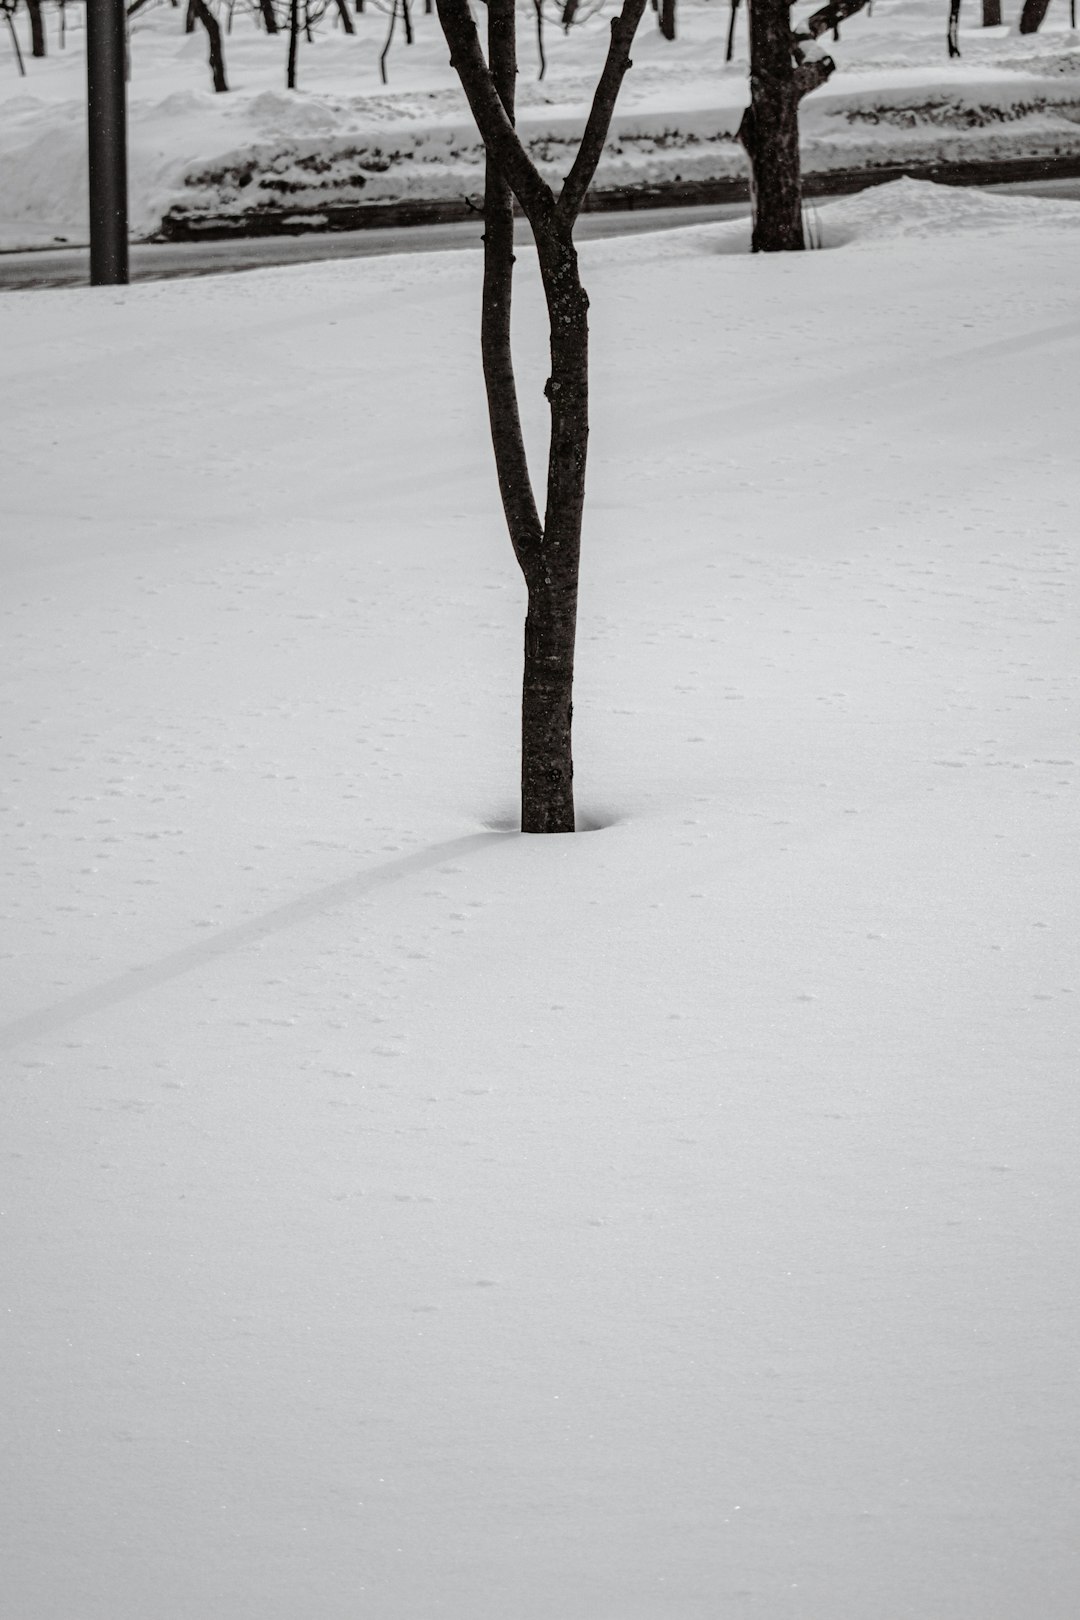 brown tree on white snow field during daytime